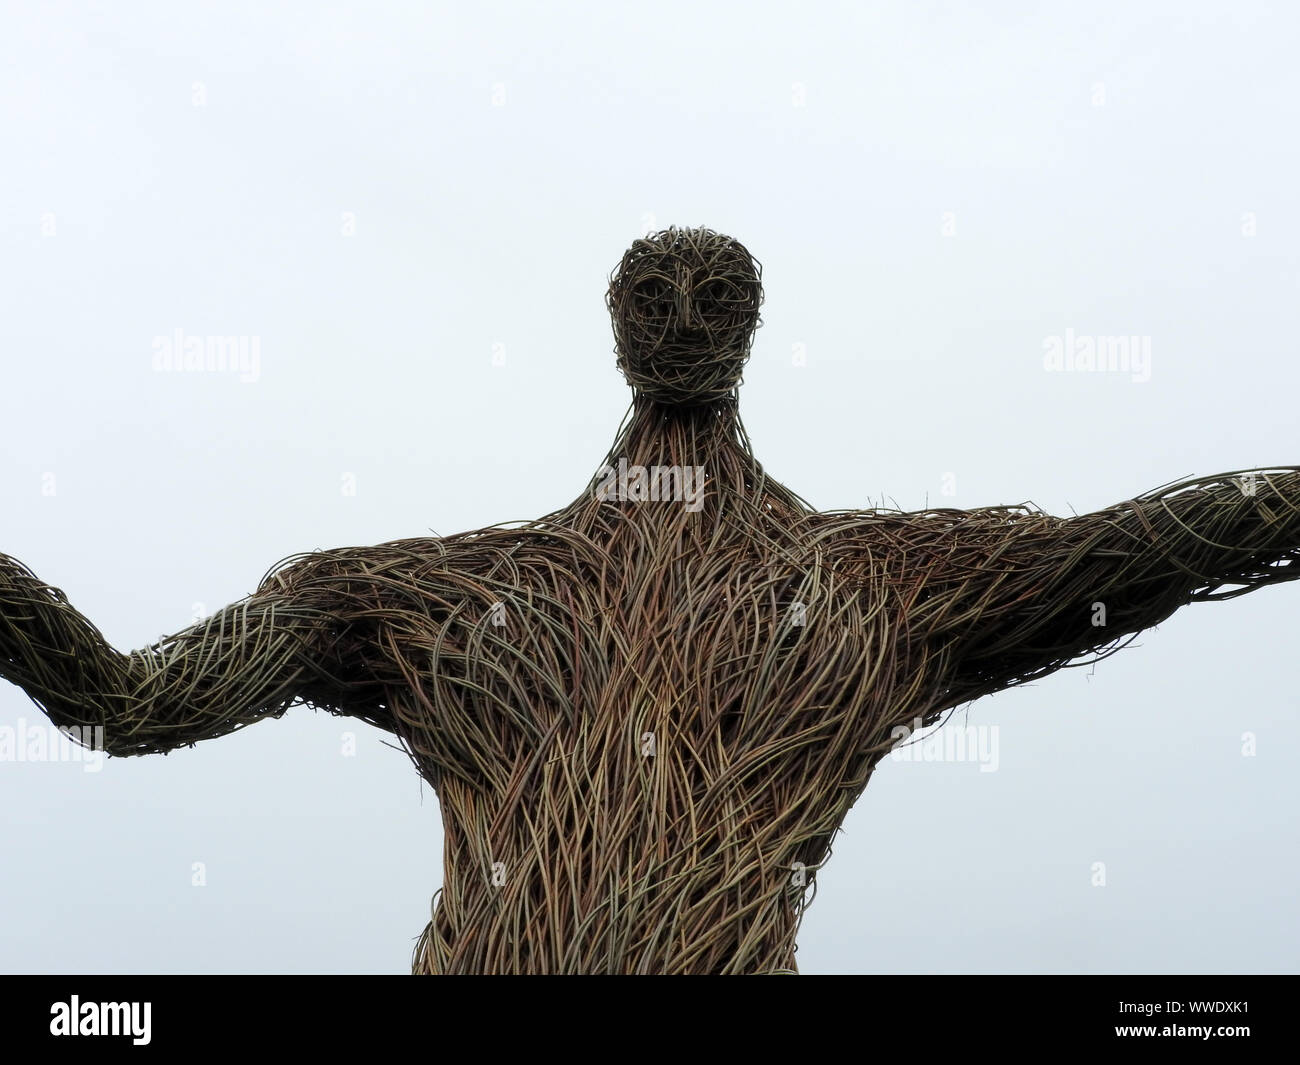 2019  image -2019  image -The face of  the new enormous Wickerman  figure in the Wickerman Festival field near Dundrennan, Dumfries and Galloway. Stock Photo